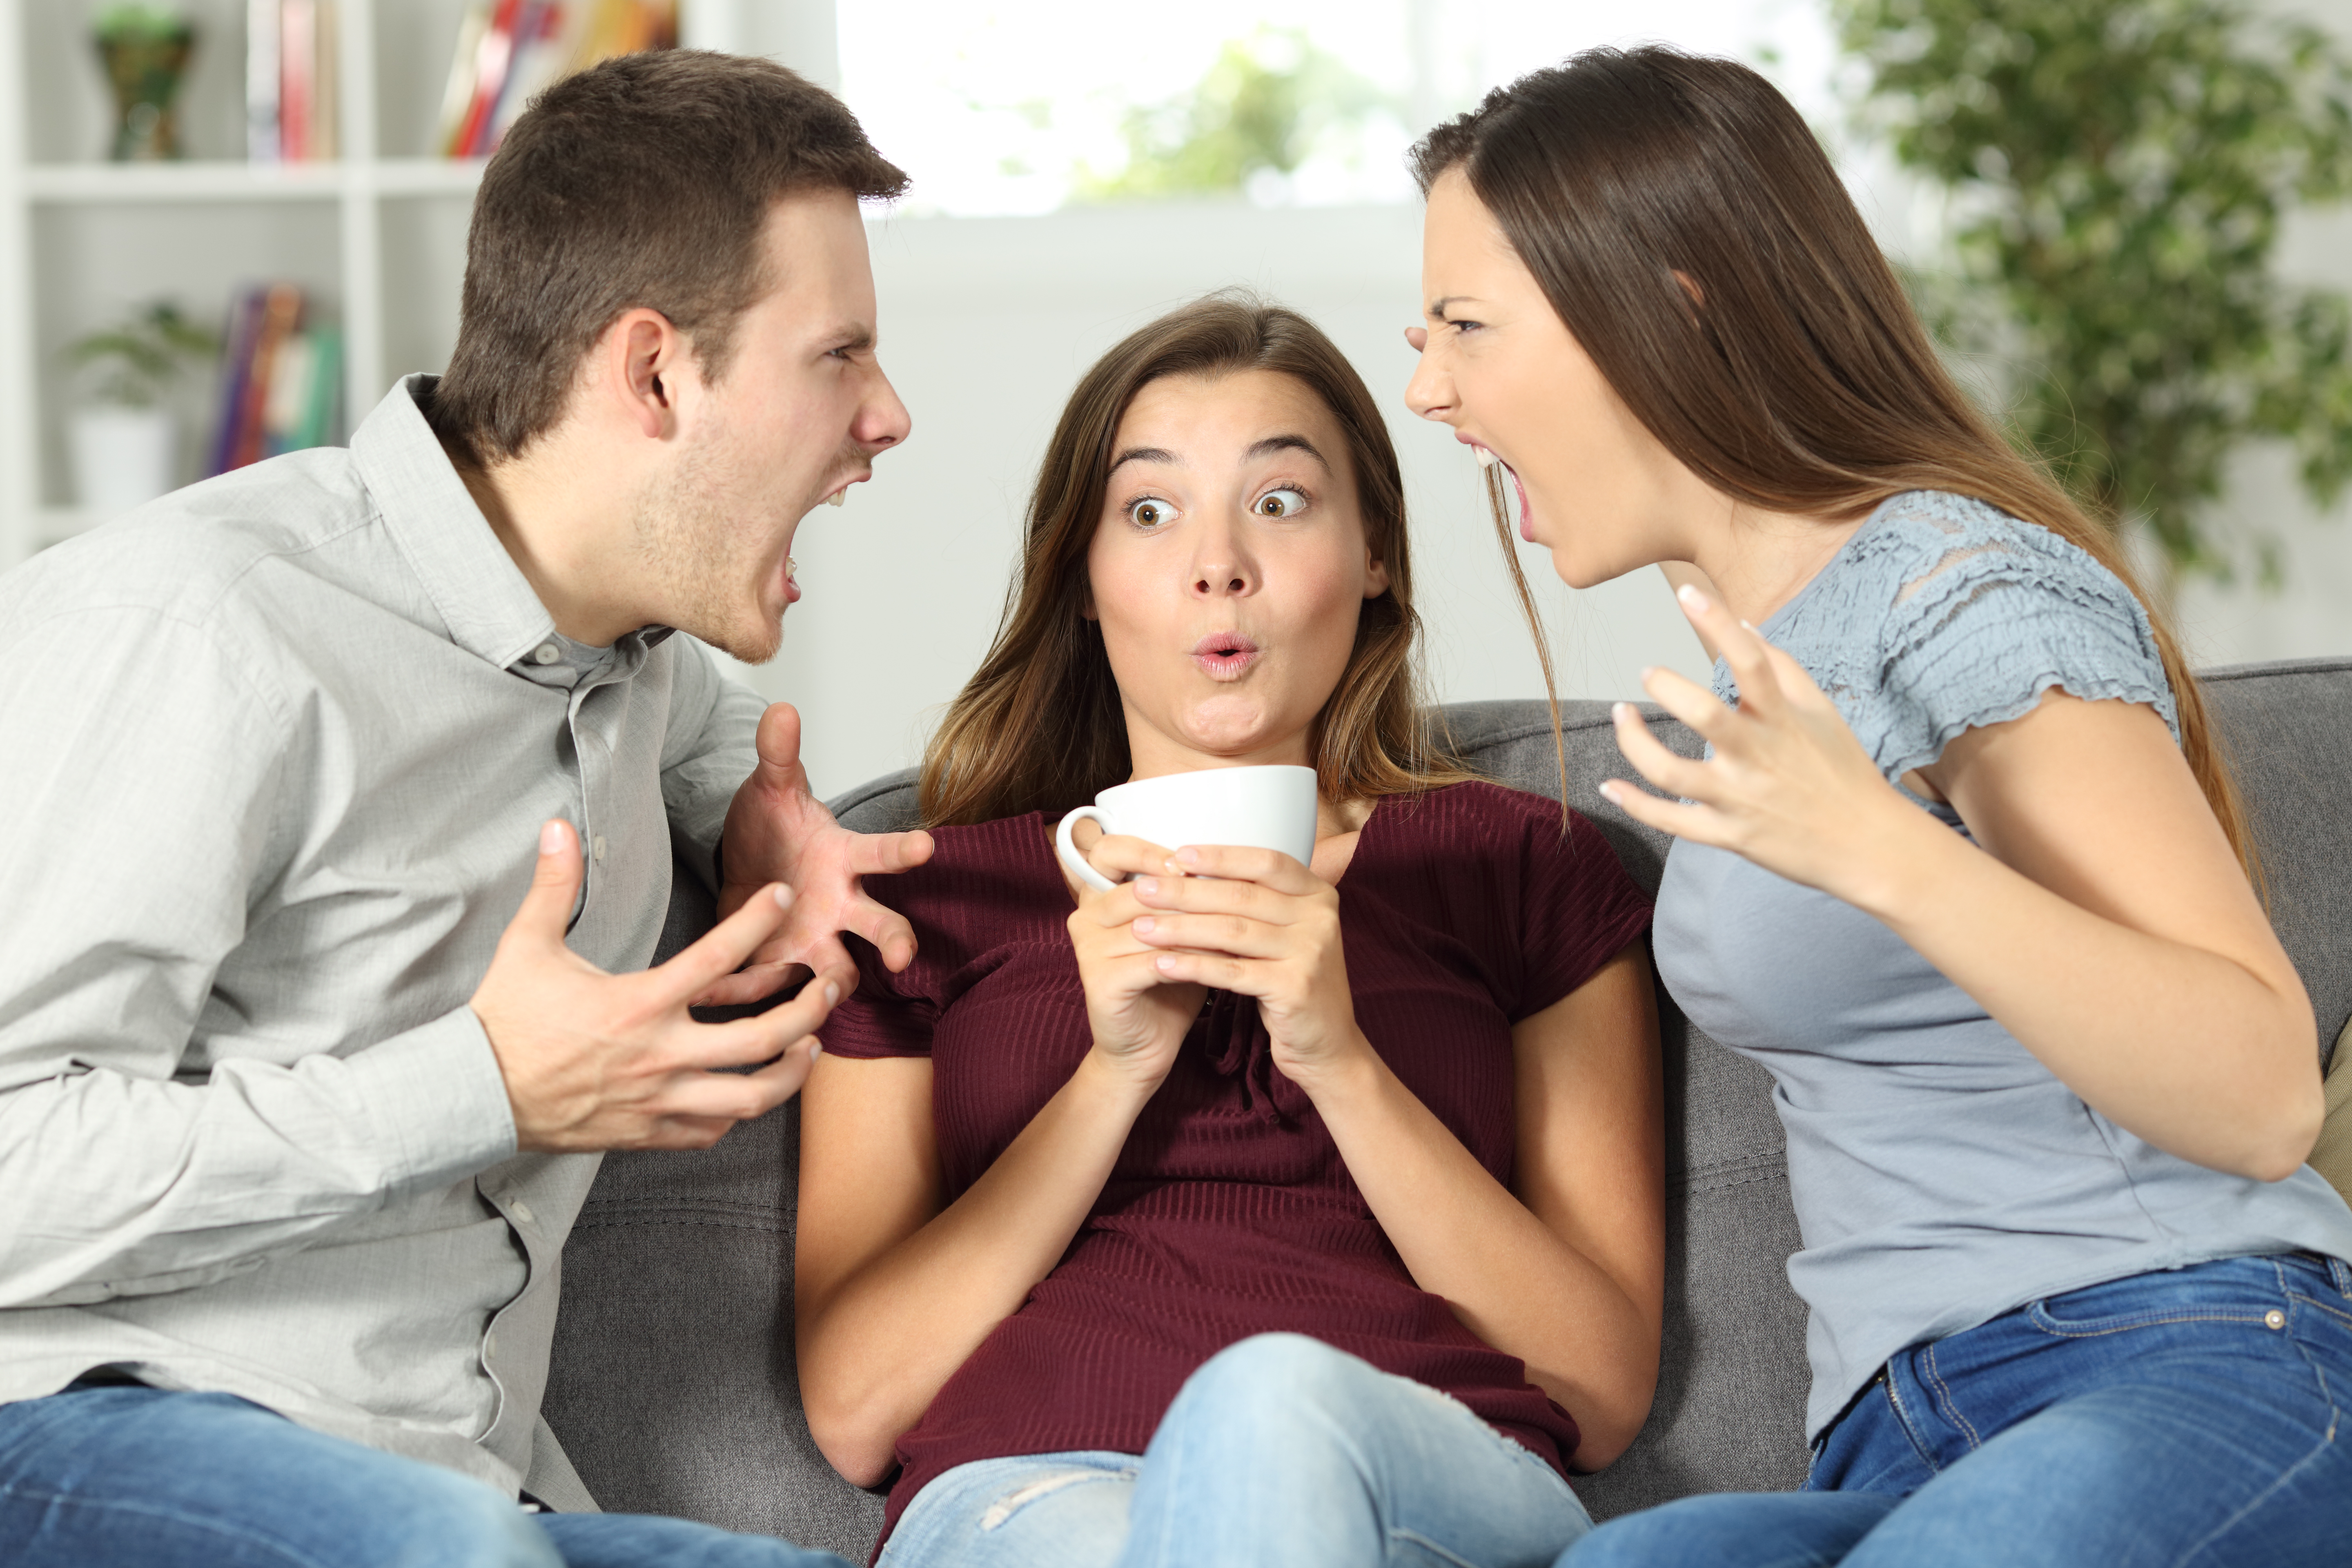 A couple and a mistress caught in an argument | Source: Getty Images